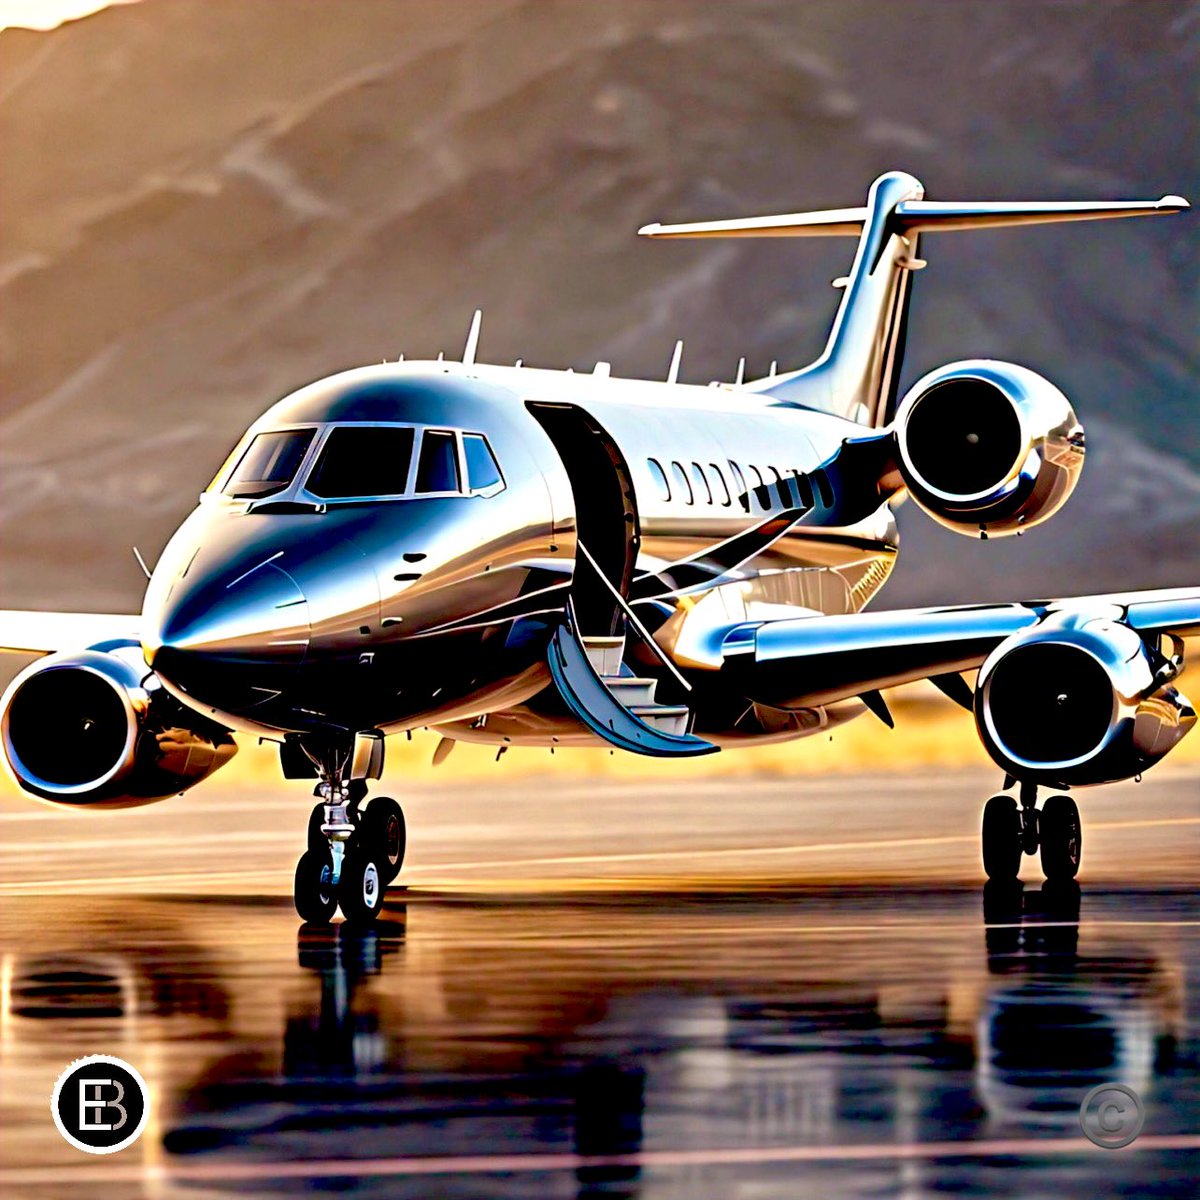 Let’s discuss your private jet needs and create a tailored solution for you via #EliteBrandsCo 👀 

We’re seeking private jets of all sizes and conditions, from light to global.

#PrivateJet #PrivateJets #PrivateJetBroker #JetBroker #PrivateAviation #BizJets #JetBusiness…